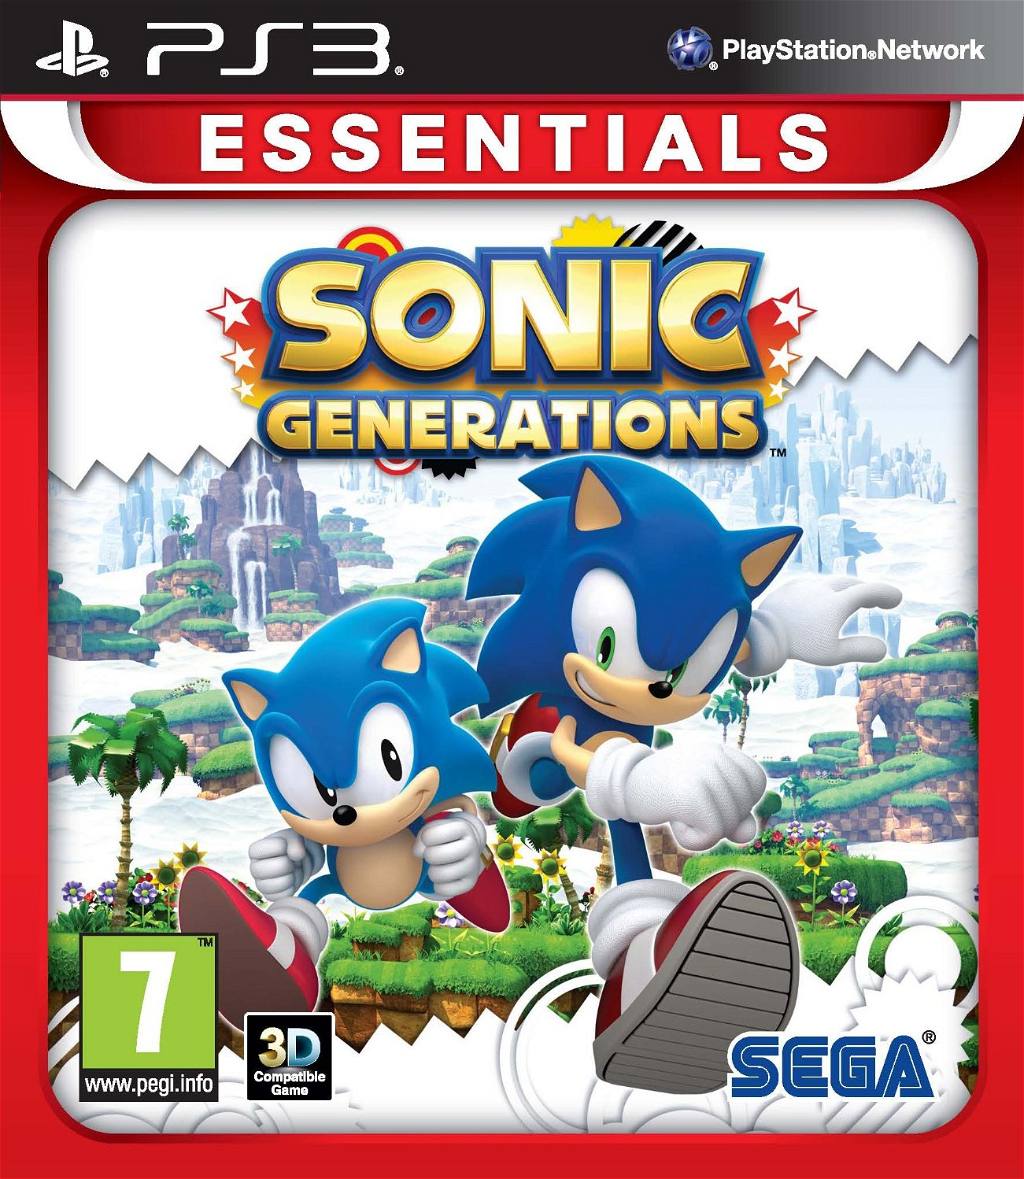 Sonic Generations for PlayStation 3